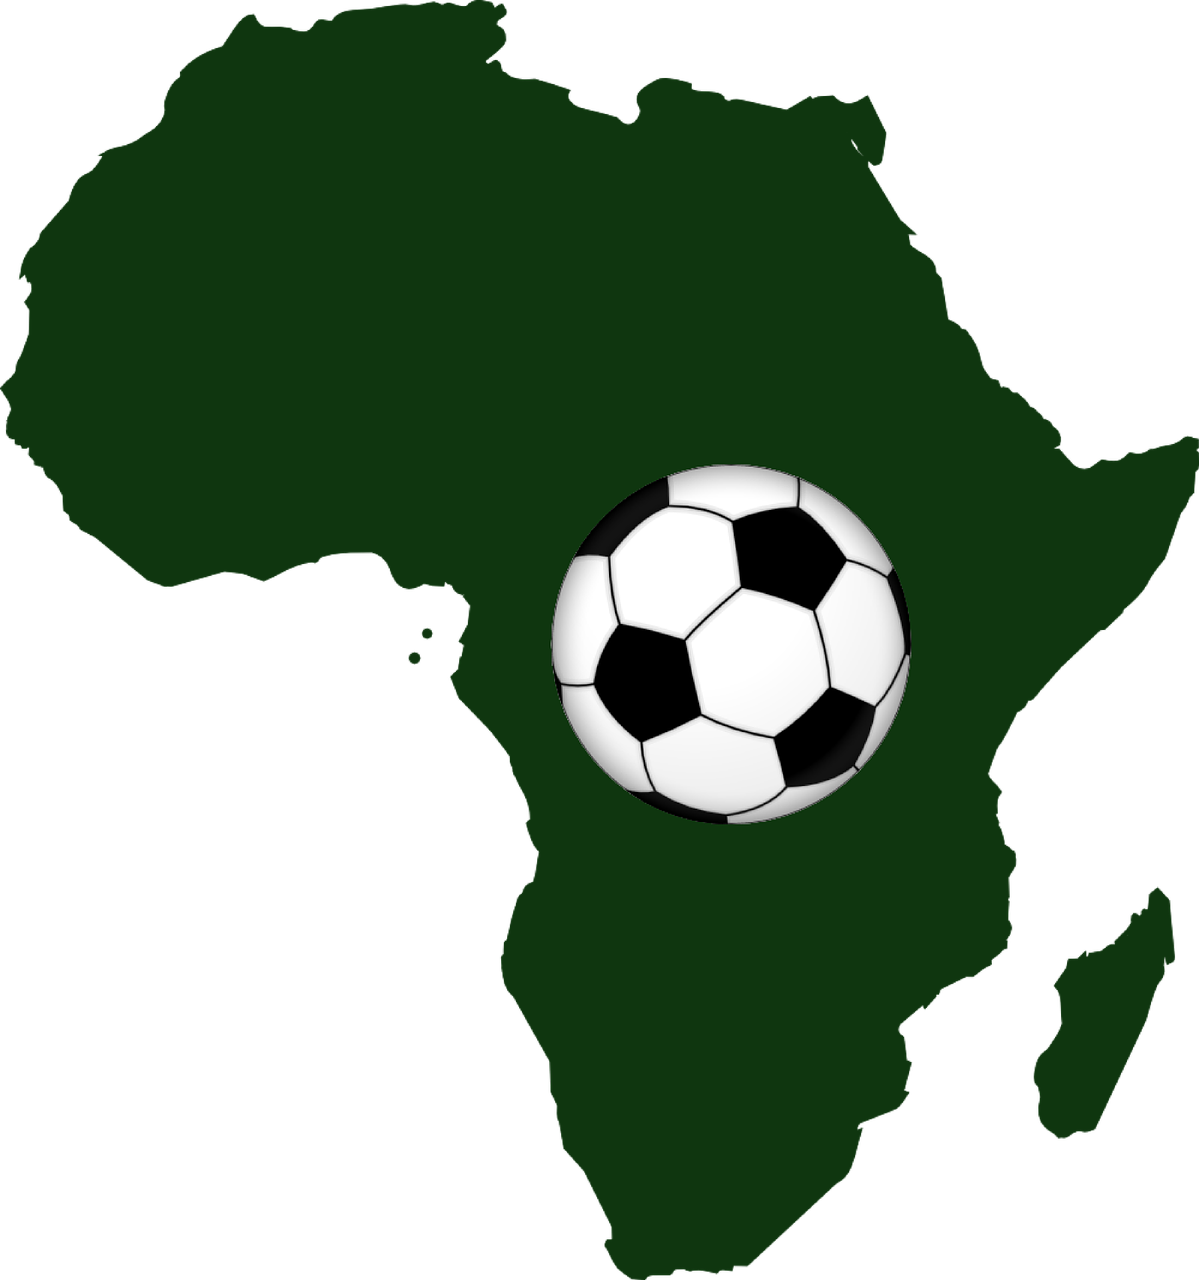 africa football continent free photo